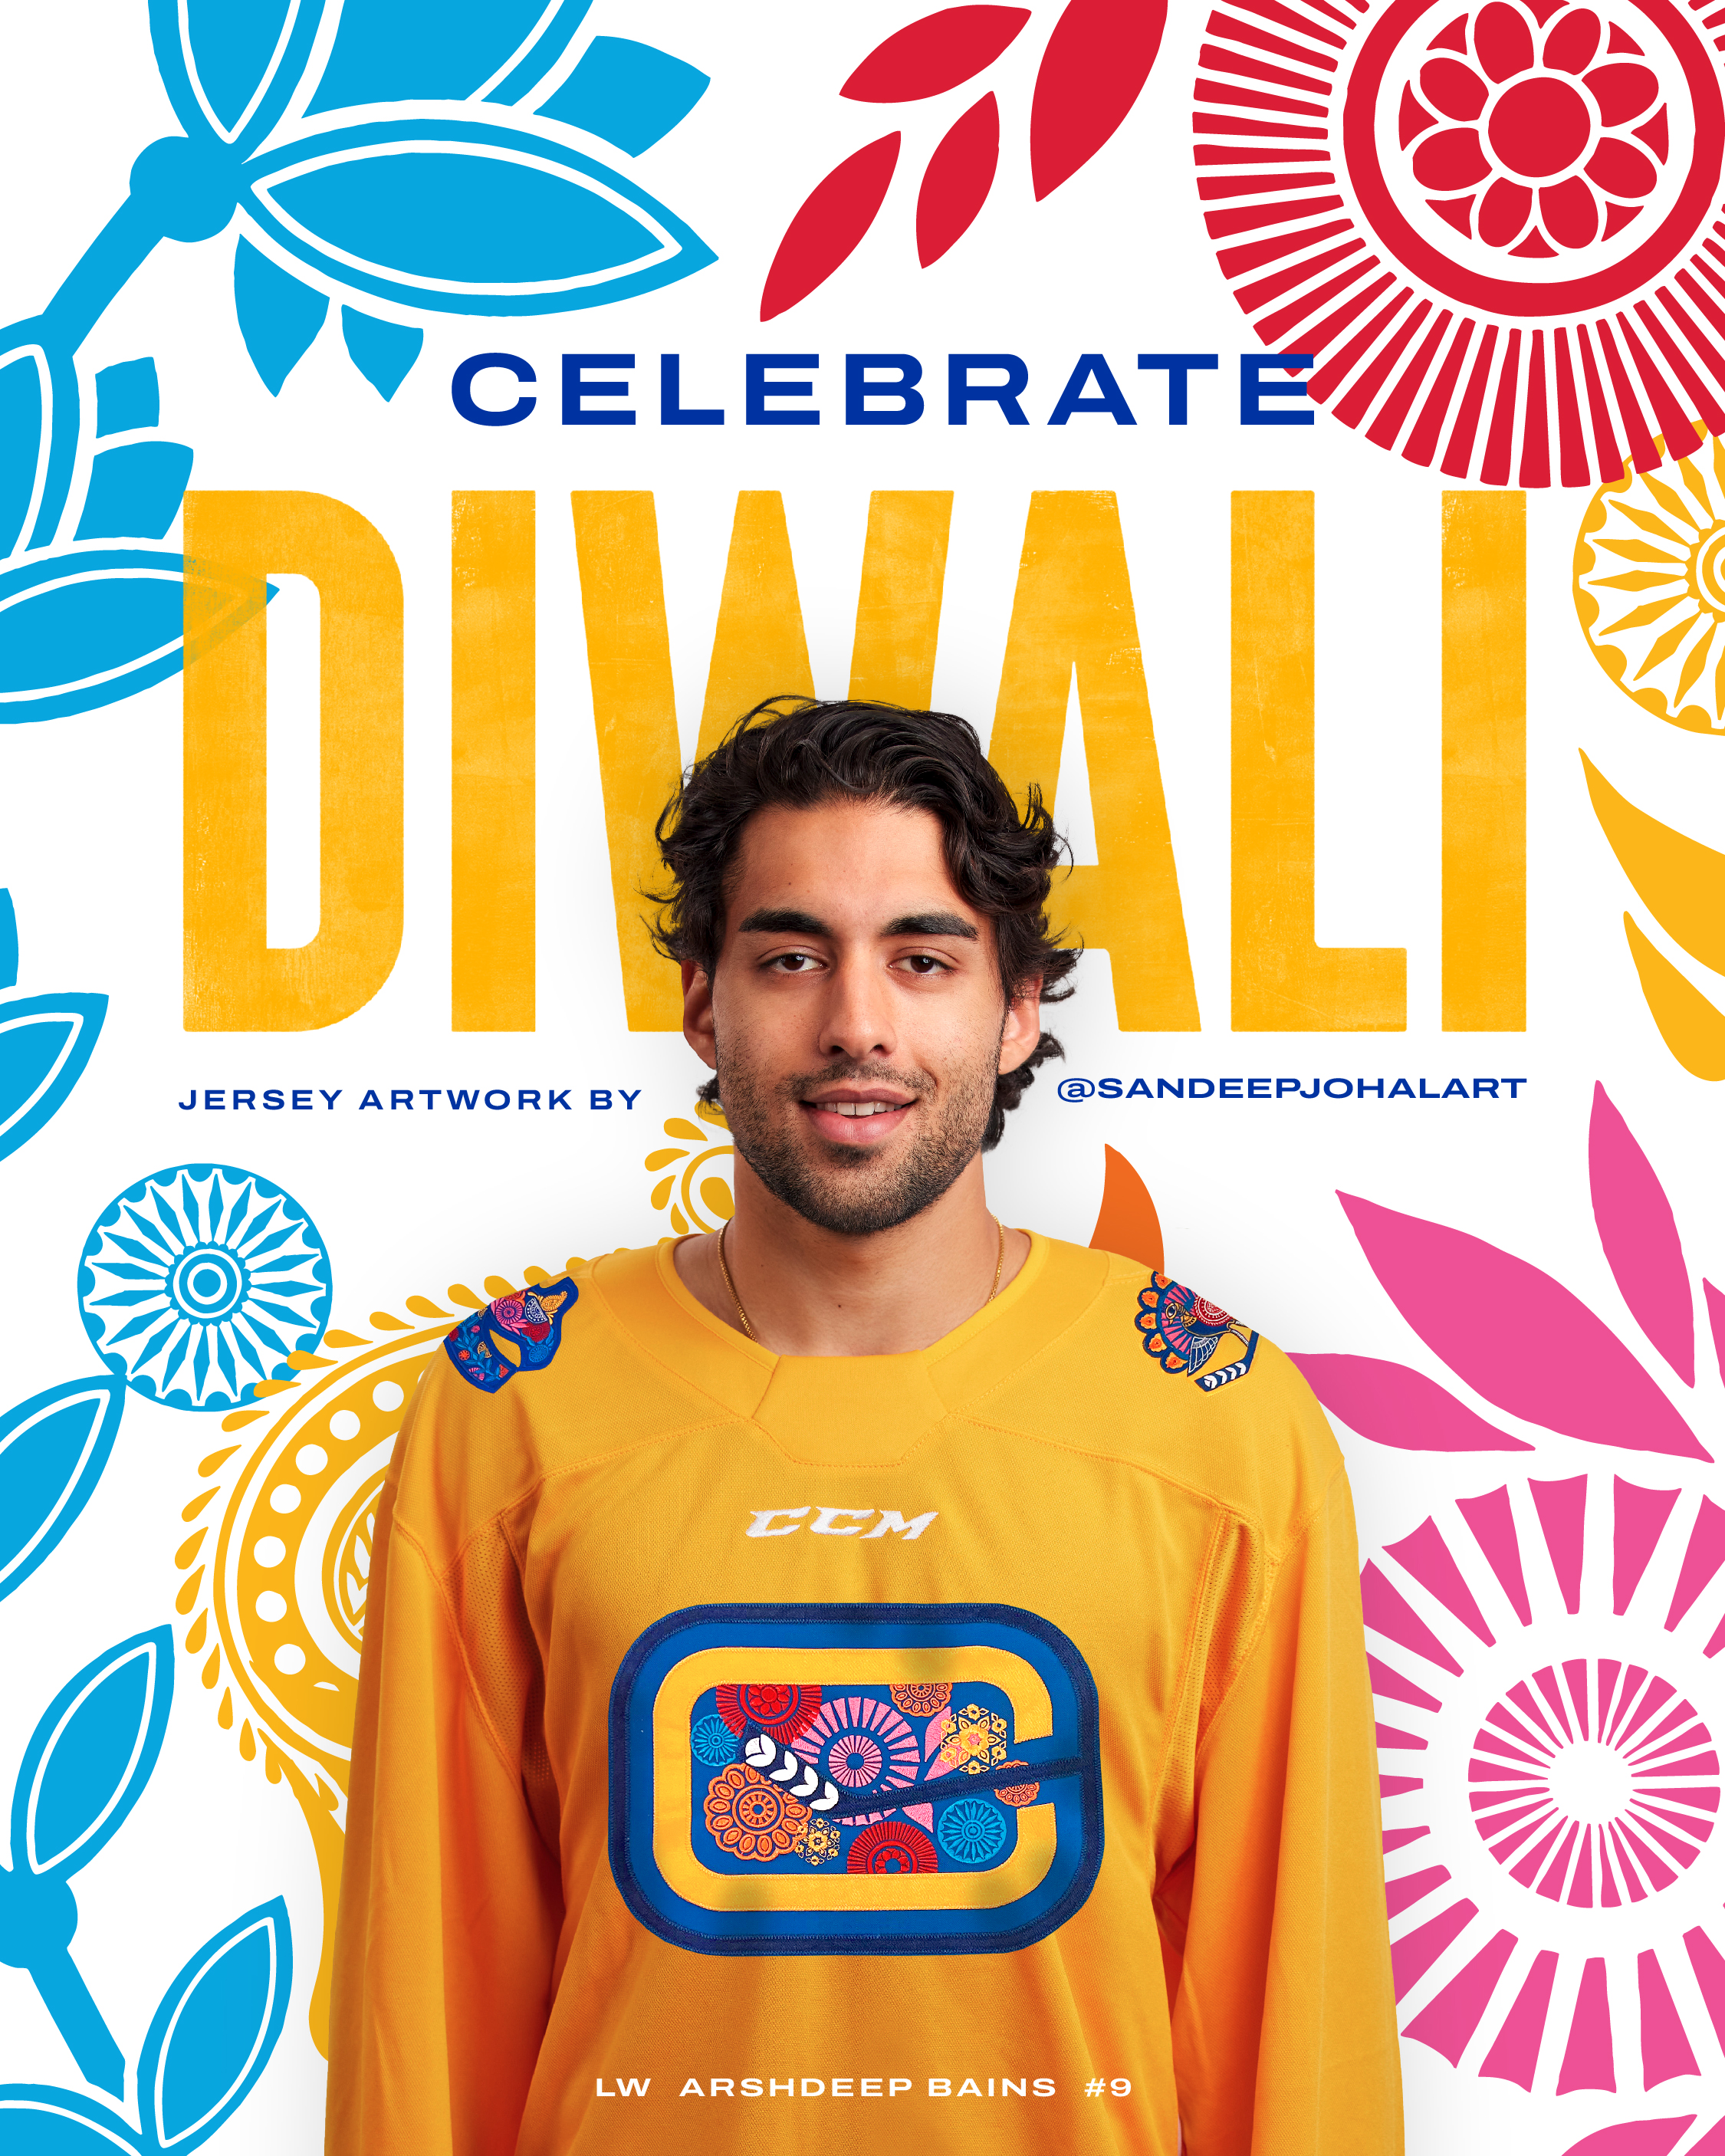 Here's how the Canucks are celebrating Diwali at Monday's game